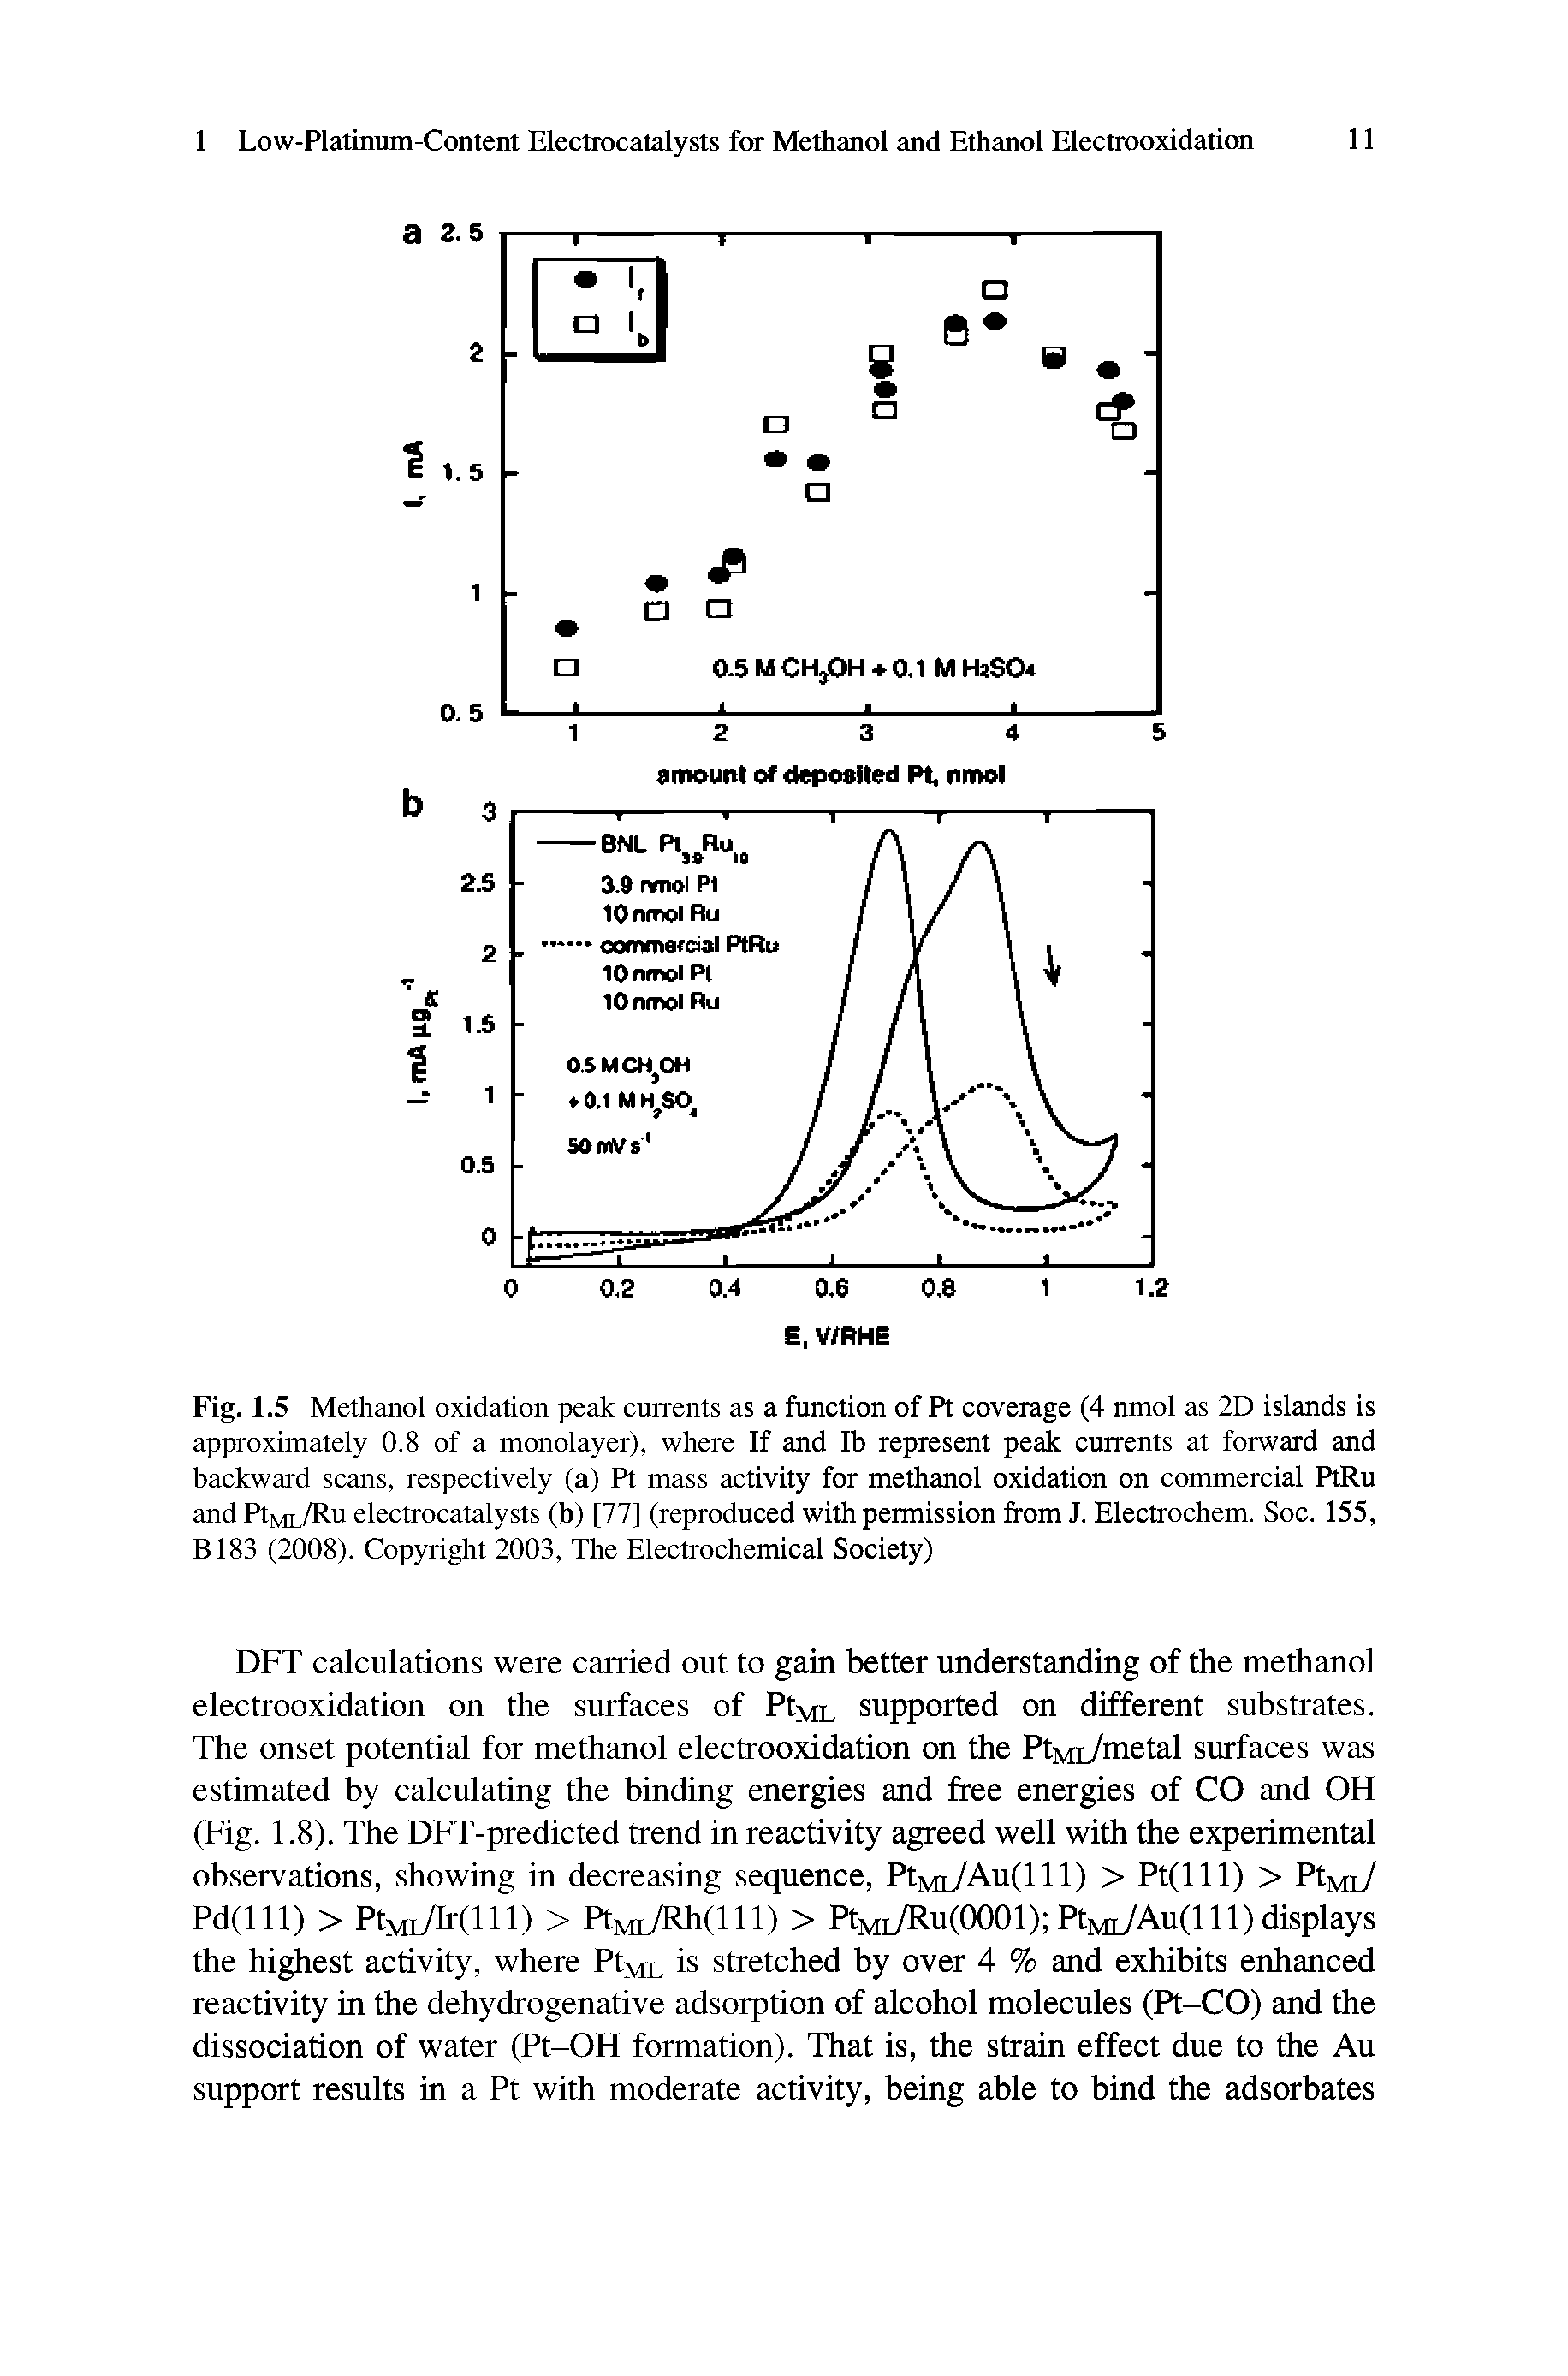 Fig. 1.5 Methanol oxidation peak currents as a function of Pt coverage (4 nmol as 2D islands is approximately 0.8 of a monolayer), where If and Ib represent peak currents at forward and backward scans, respectively (a) Pt mass activity for methanol oxidation on commercial PtRu and PtML/Ru electrocatalysts (b) [77] (reproduced with permission from J. Electrochem. Soc. 155, B183 (2008). Copyright 2003, The Electrochemical Society)...